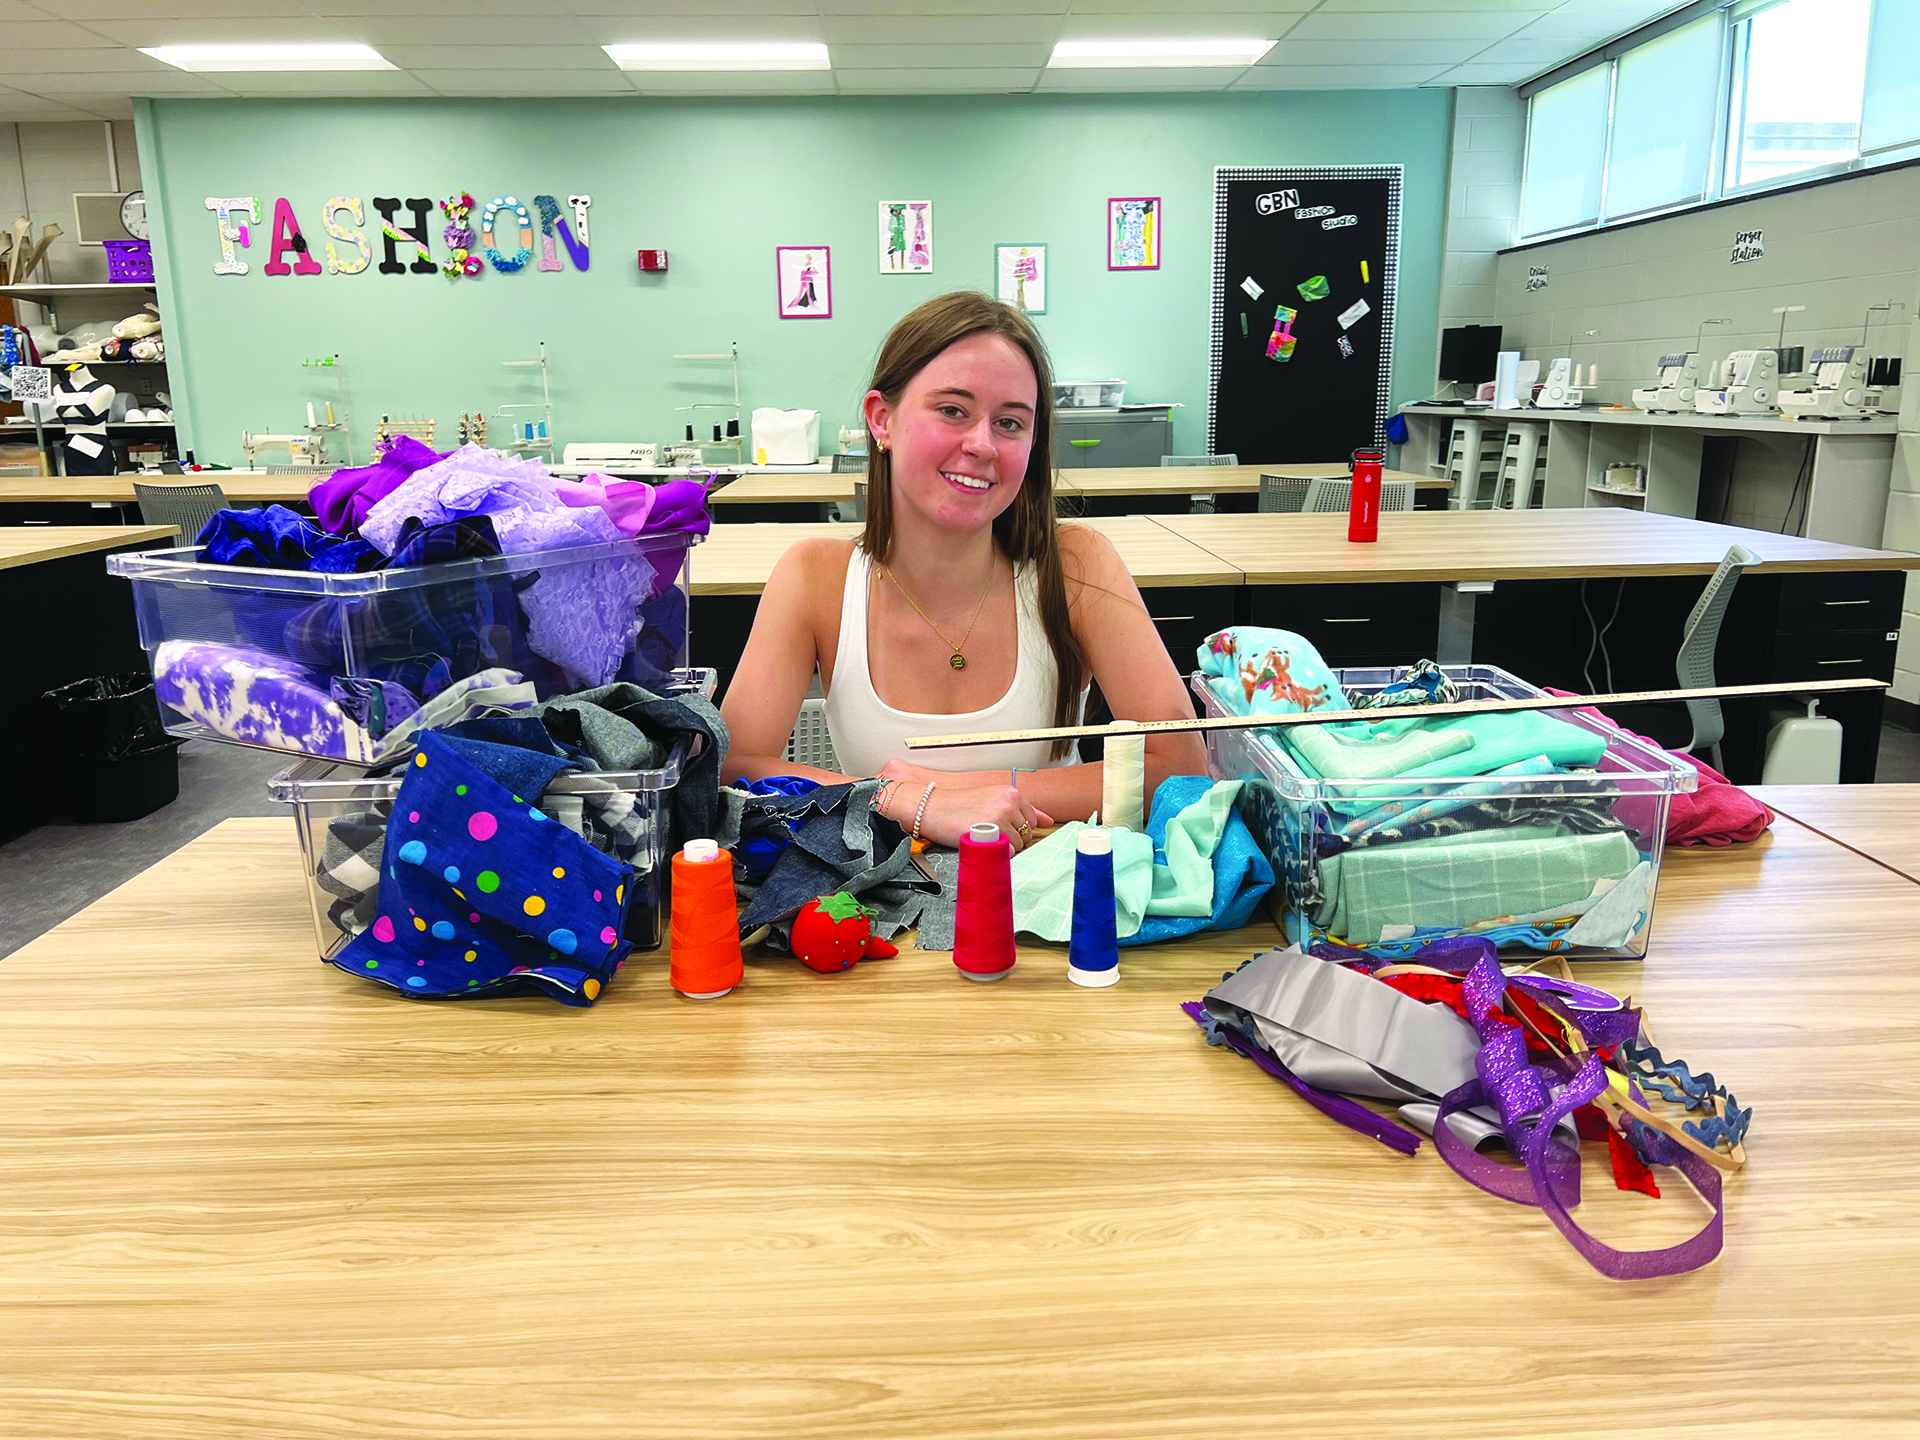 Senior Darcy Brudenell sits with fabric, thread and other materials she uses while sewing. Most recently, Brudenell has used the embroidery machine in Glenbrook North’s fashion studio to make custom college merchandise for her peers.